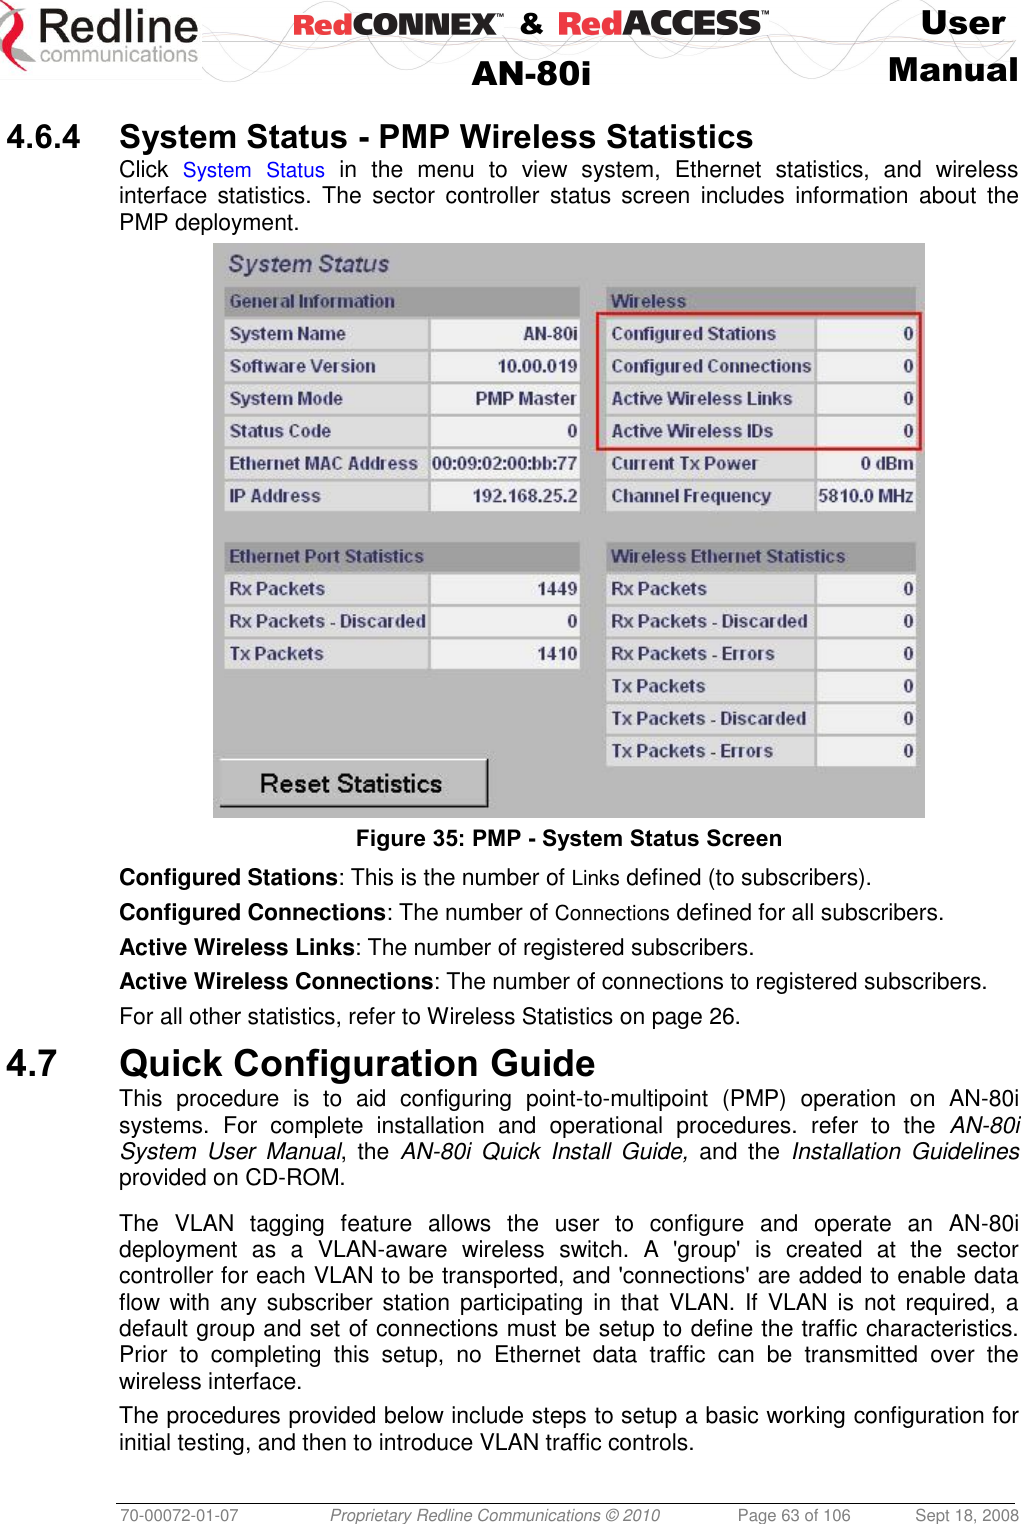    &amp;  User  AN-80i Manual  70-00072-01-07 Proprietary Redline Communications © 2010  Page 63 of 106  Sept 18, 2008  4.6.4 System Status - PMP Wireless Statistics Click  System Status in  the  menu  to  view  system,  Ethernet  statistics,  and  wireless interface  statistics.  The  sector  controller  status  screen  includes  information  about  the PMP deployment.  Figure 35: PMP - System Status Screen Configured Stations: This is the number of Links defined (to subscribers). Configured Connections: The number of Connections defined for all subscribers. Active Wireless Links: The number of registered subscribers. Active Wireless Connections: The number of connections to registered subscribers. For all other statistics, refer to Wireless Statistics on page 26.  4.7 Quick Configuration Guide This  procedure  is  to  aid  configuring  point-to-multipoint  (PMP)  operation  on  AN-80i systems.  For  complete  installation  and  operational  procedures.  refer  to  the  AN-80i System  User  Manual,  the  AN-80i  Quick  Install  Guide,  and  the  Installation  Guidelines provided on CD-ROM.  The  VLAN  tagging  feature  allows  the  user  to  configure  and  operate  an  AN-80i deployment  as  a  VLAN-aware  wireless  switch.  A  &apos;group&apos;  is  created  at  the  sector controller for each VLAN to be transported, and &apos;connections&apos; are added to enable data flow with  any subscriber  station participating in that  VLAN. If VLAN  is not required, a default group and set of connections must be setup to define the traffic characteristics. Prior  to  completing  this  setup,  no  Ethernet  data  traffic  can  be  transmitted  over  the wireless interface. The procedures provided below include steps to setup a basic working configuration for initial testing, and then to introduce VLAN traffic controls.  